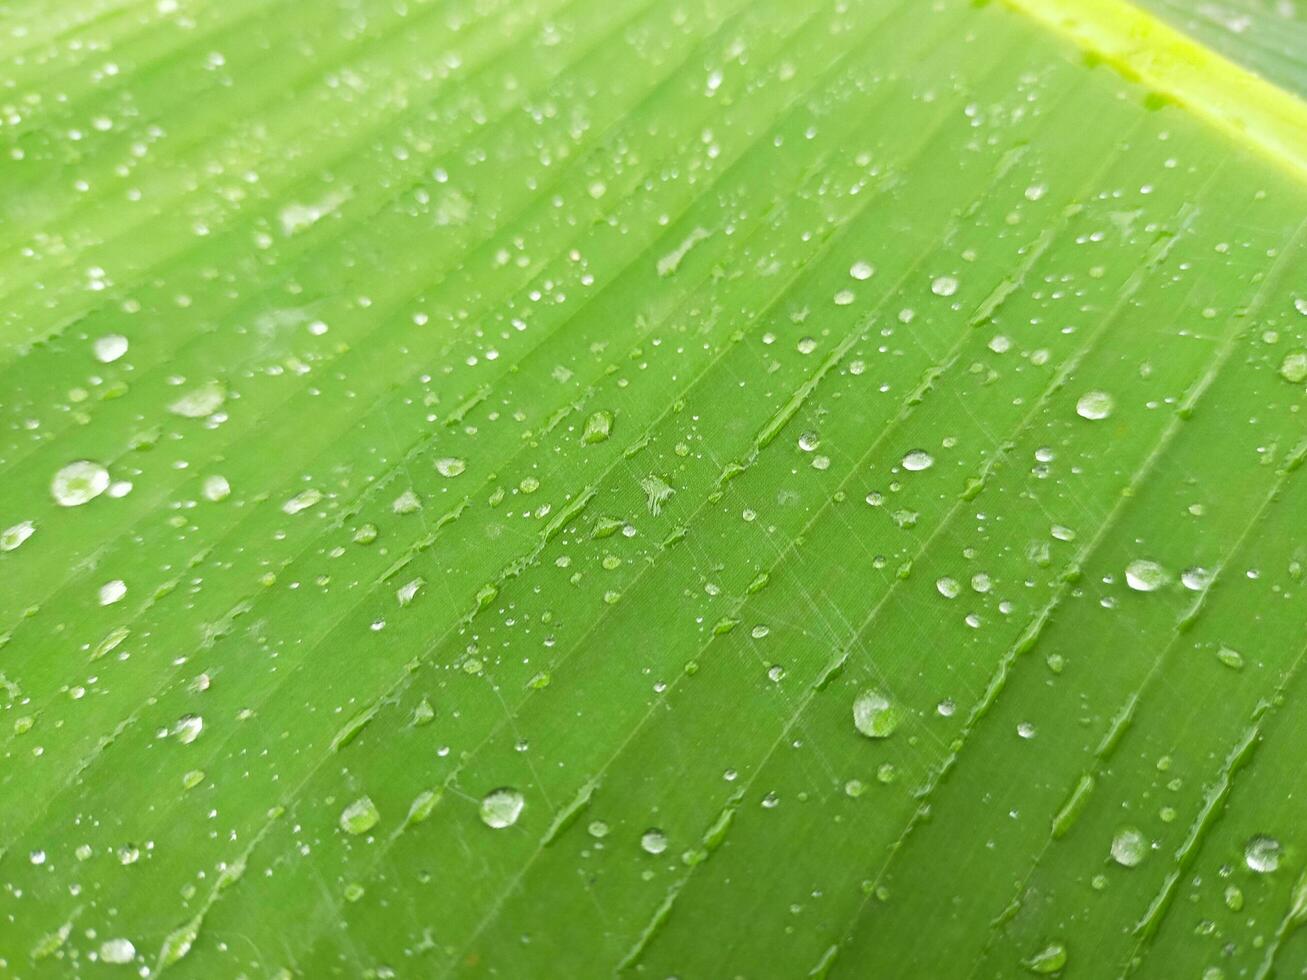 banana leaves and raindrops as background material. photo